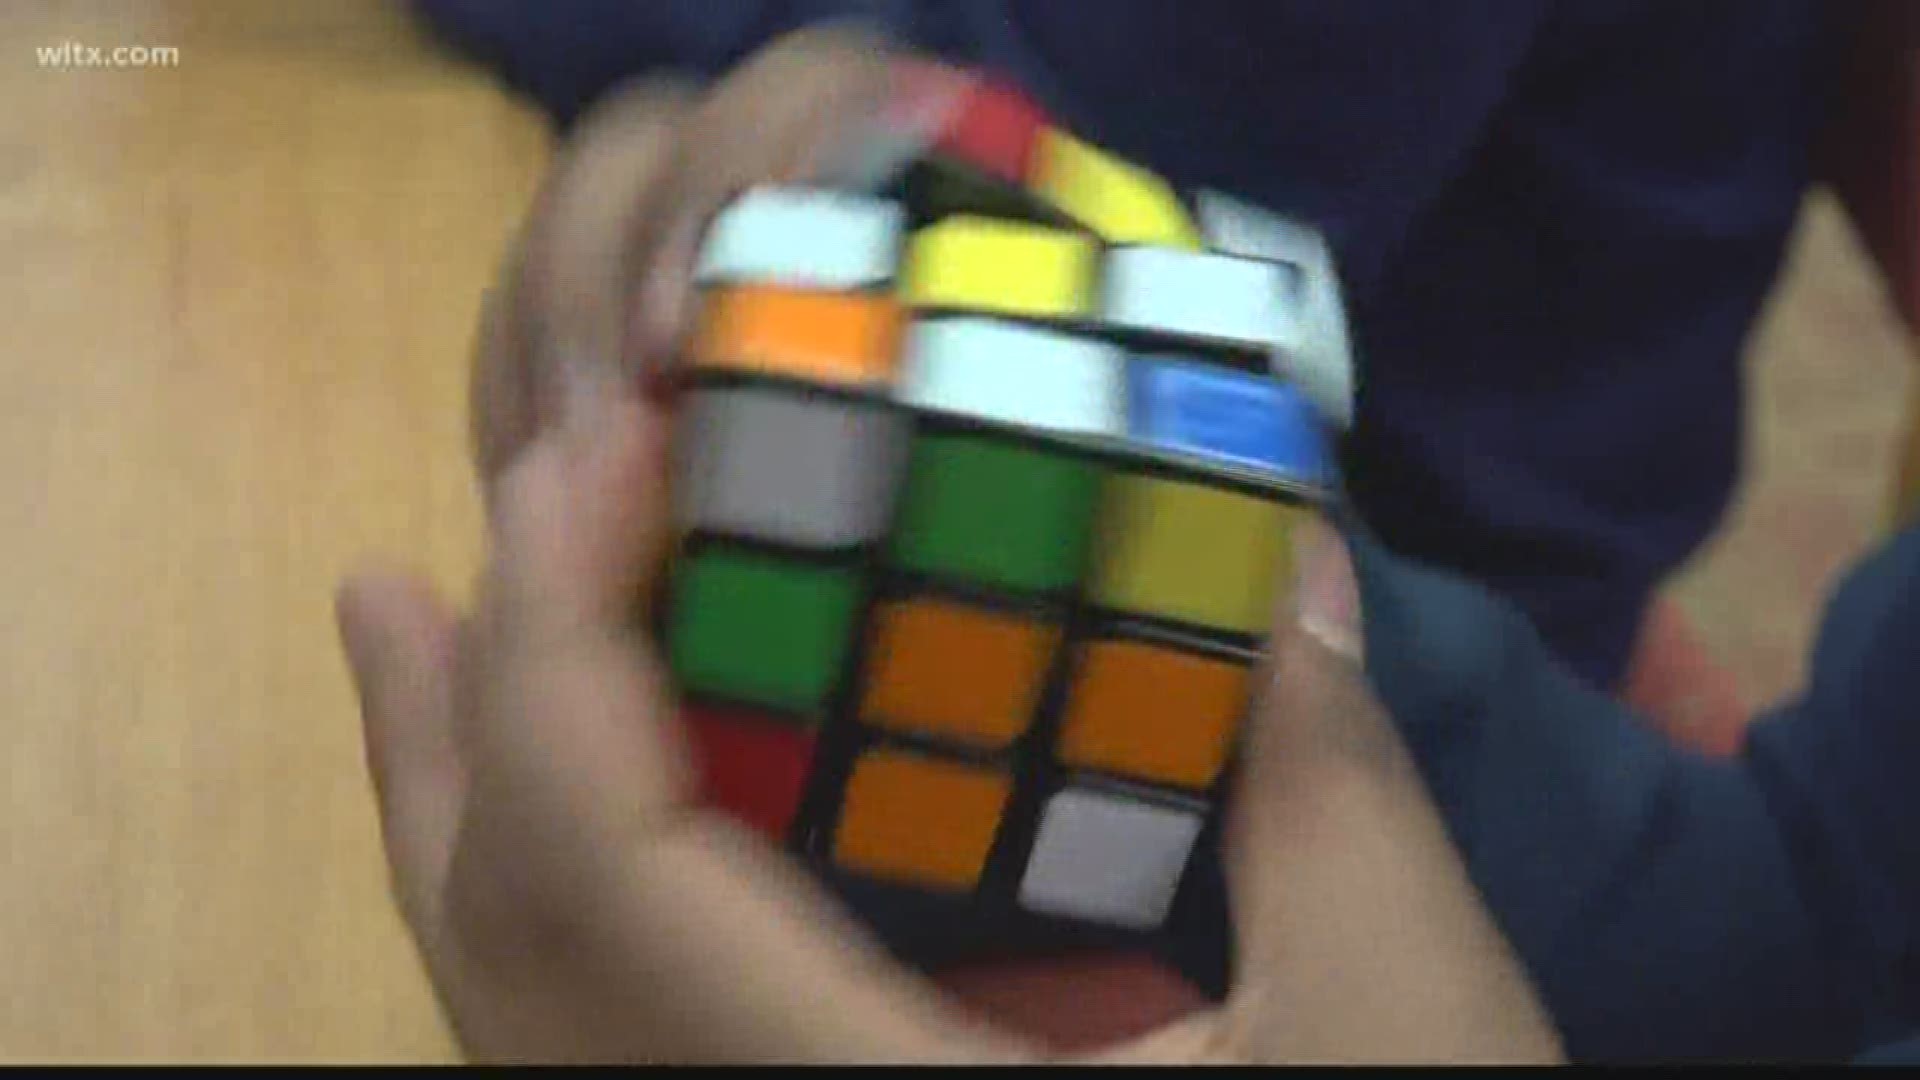 Students at W.G. Sanders Middle School are competing to see who can solve a Rubik's cube the fastest.